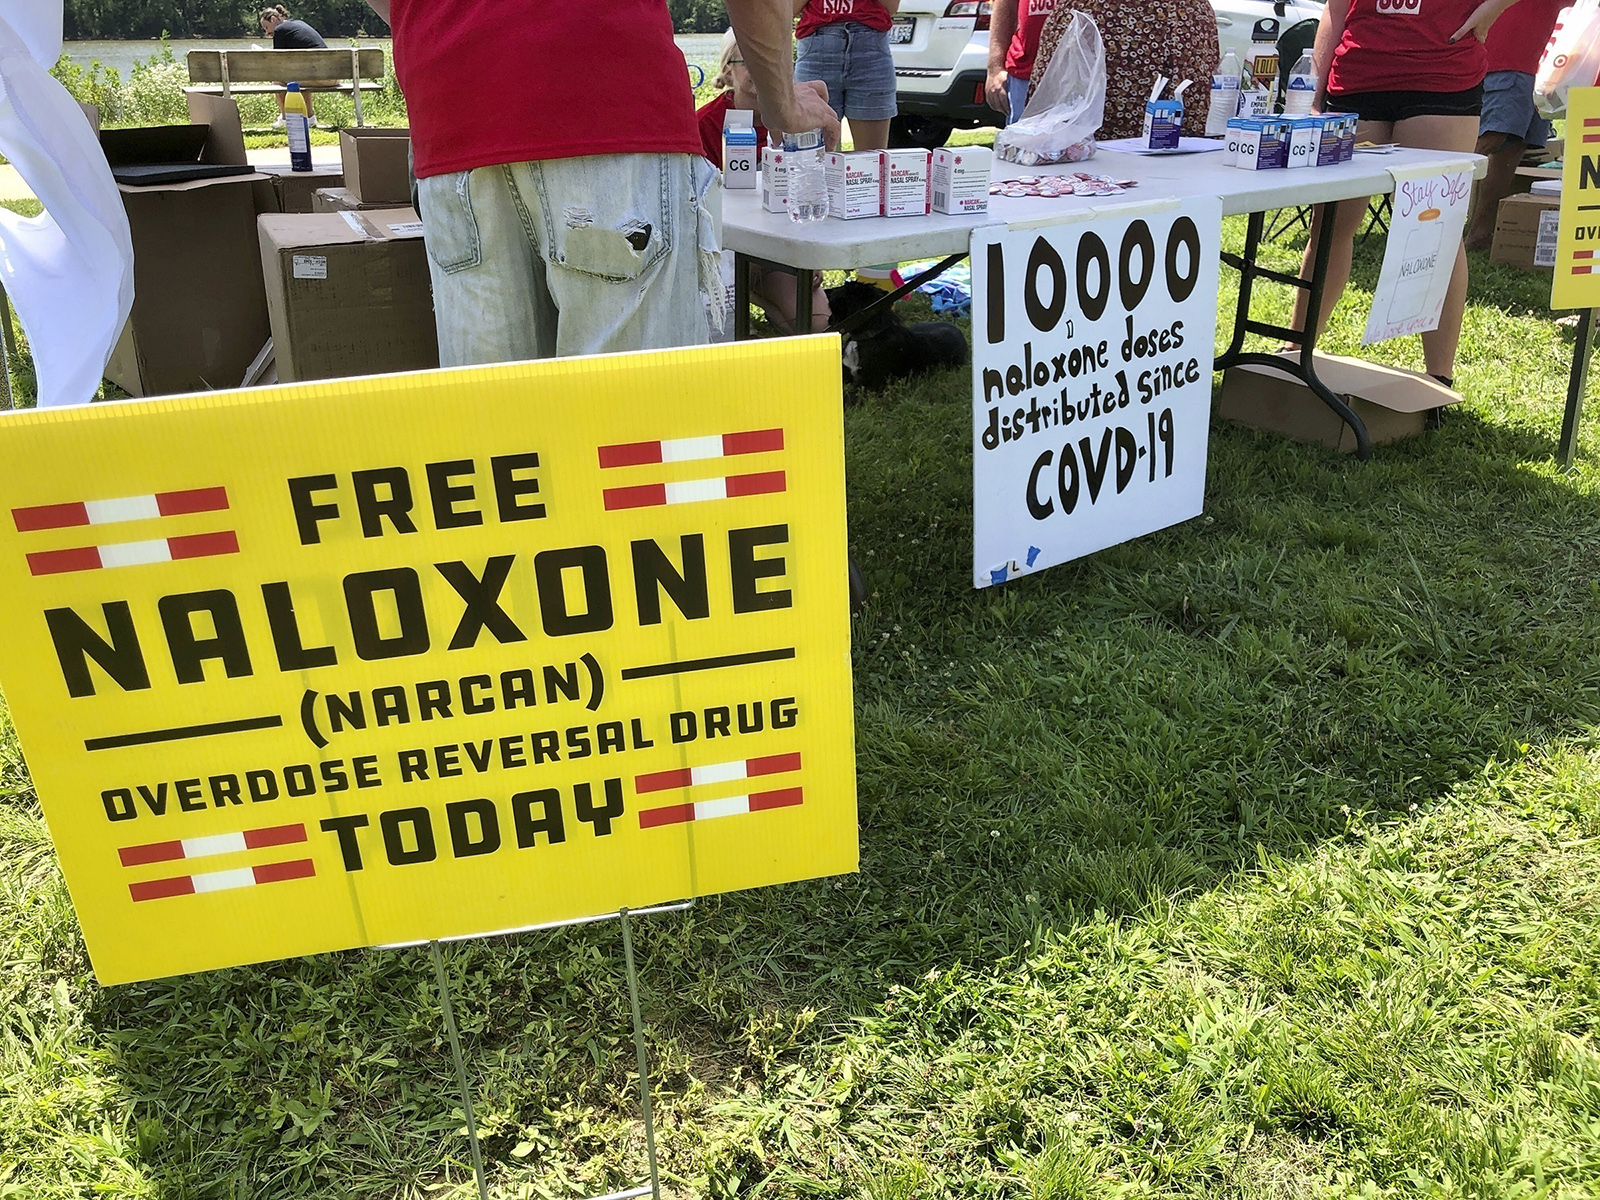 FILE - Signs are displayed at a tent during a health event on June 26, 2021, in Charleston, W.Va. Volunteers at the tent passed free doses of naloxone, a drug that reverses the effects of an opioid overdose by helping the person breathe again. (AP Photo/John Raby, File)